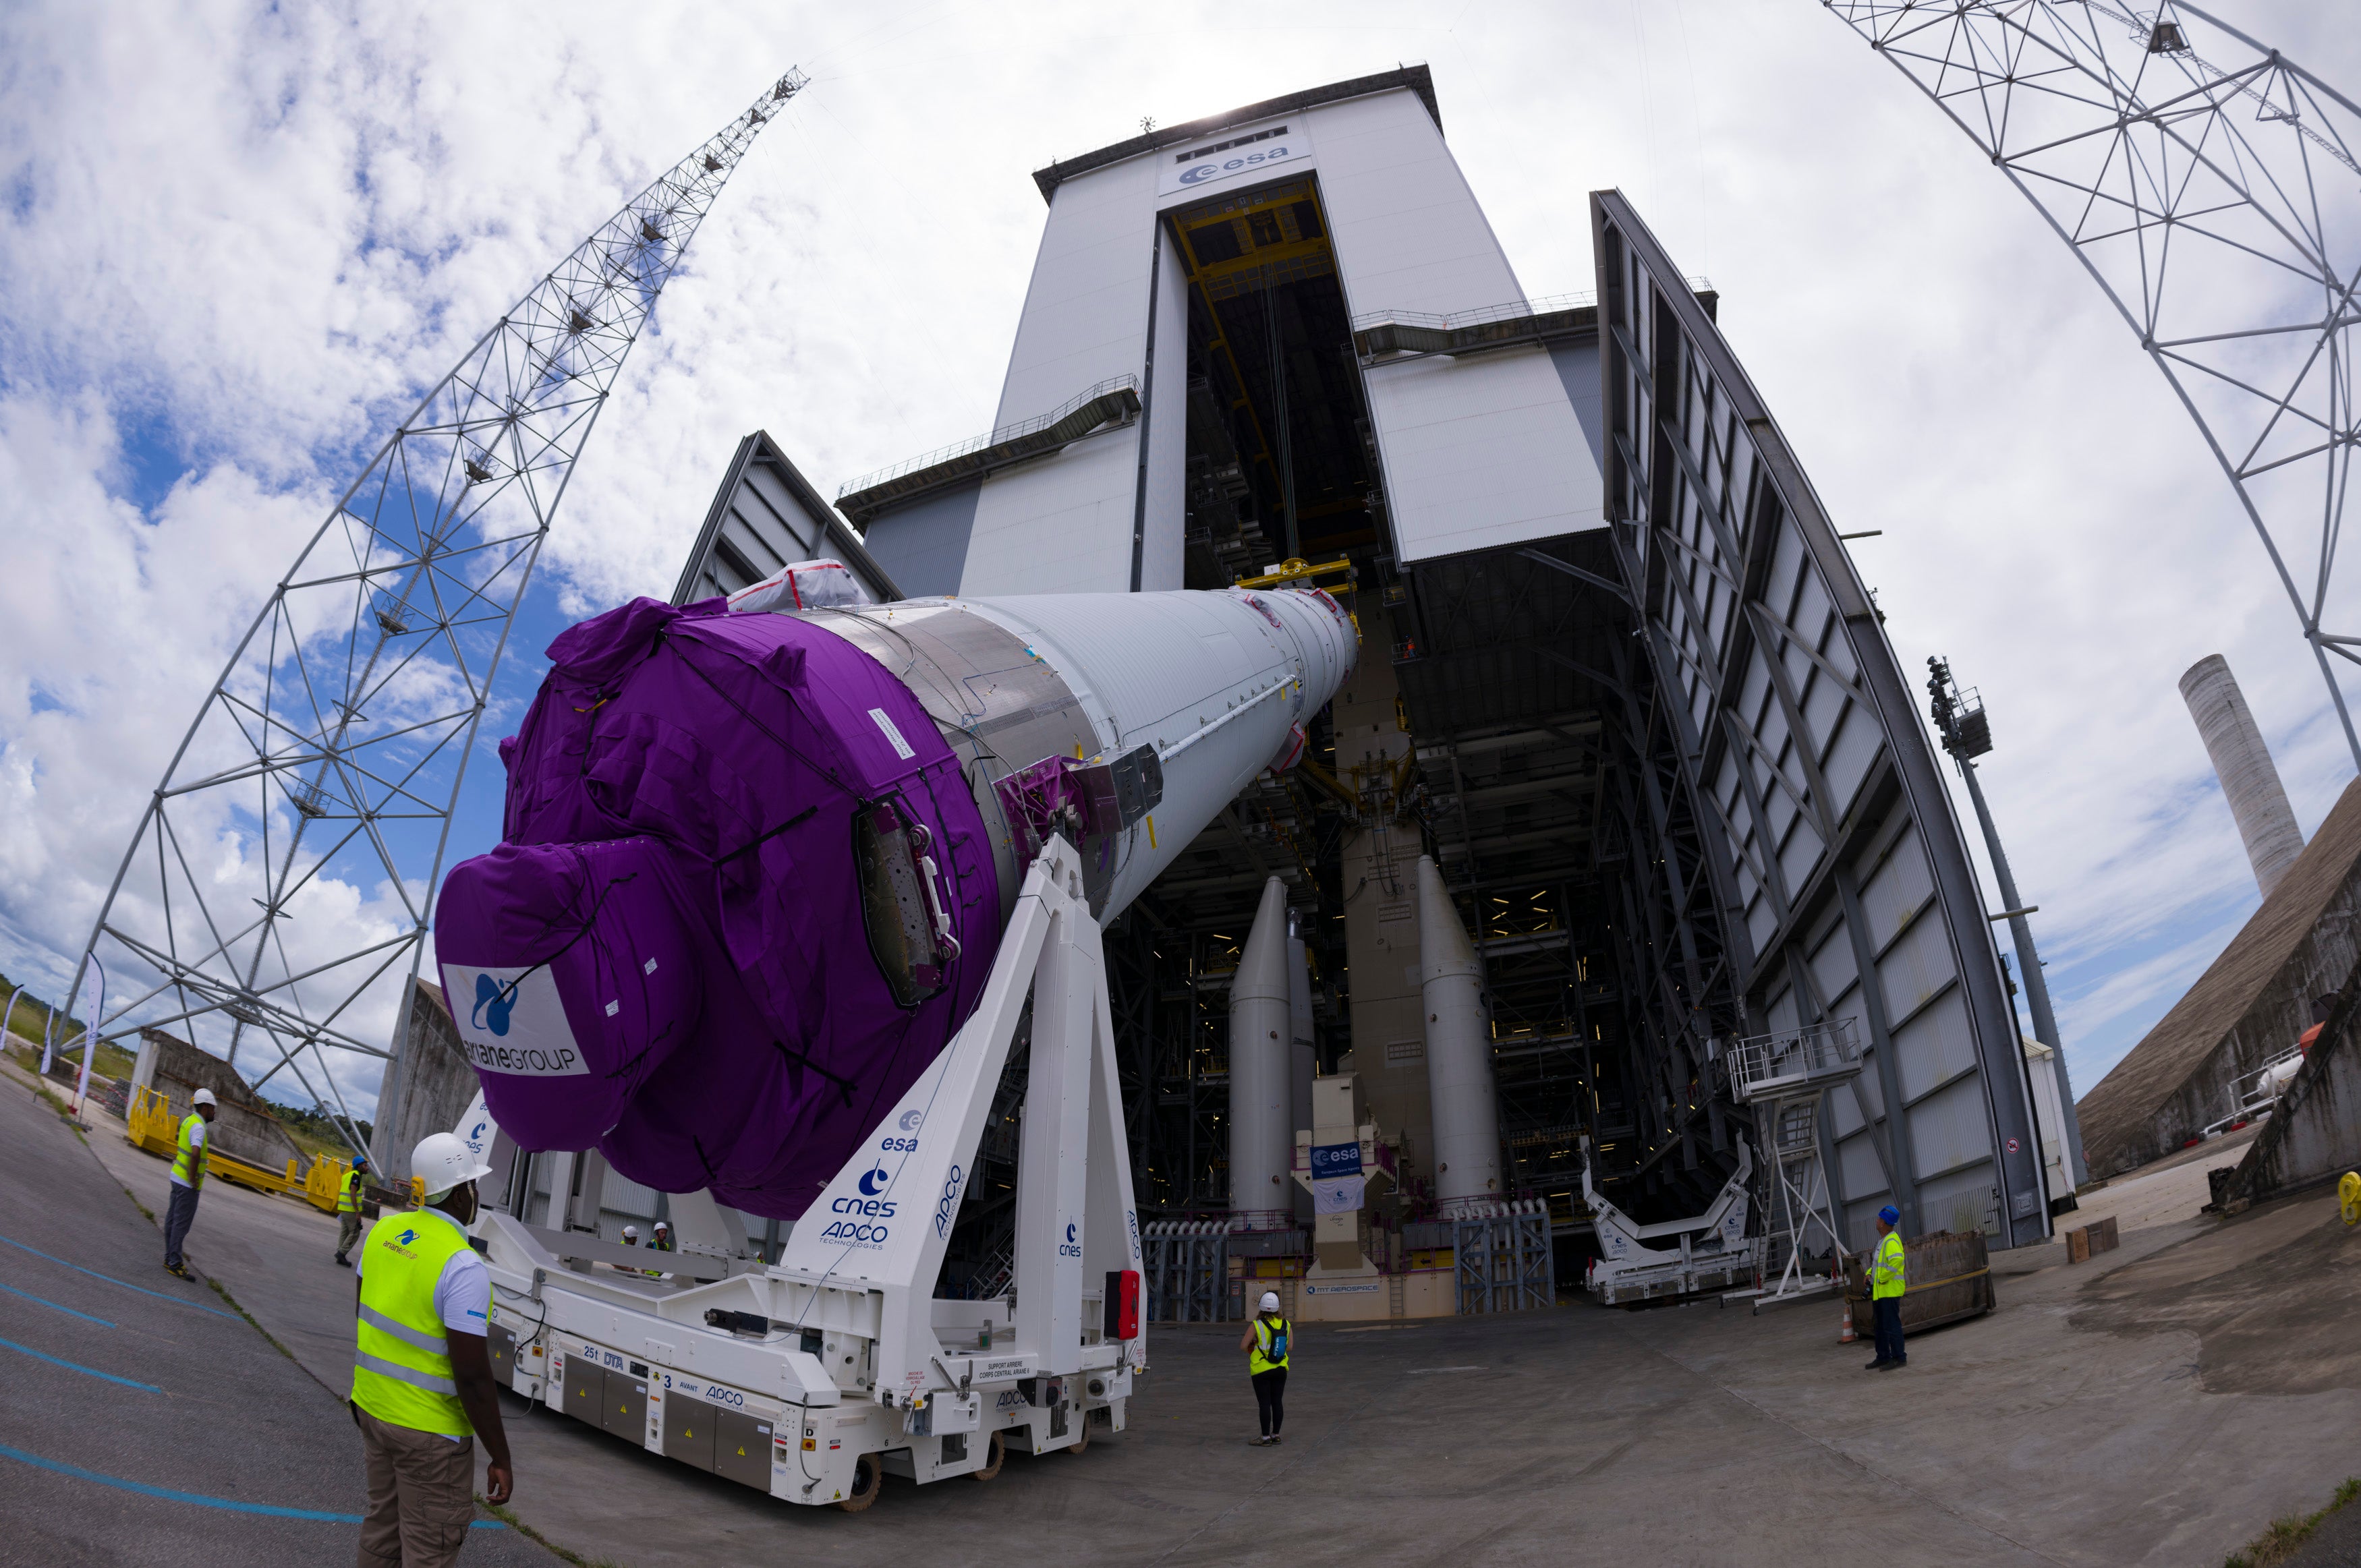 An Ariane 6 test model central core during testing. (Photo: ESA/S. Corvaja)